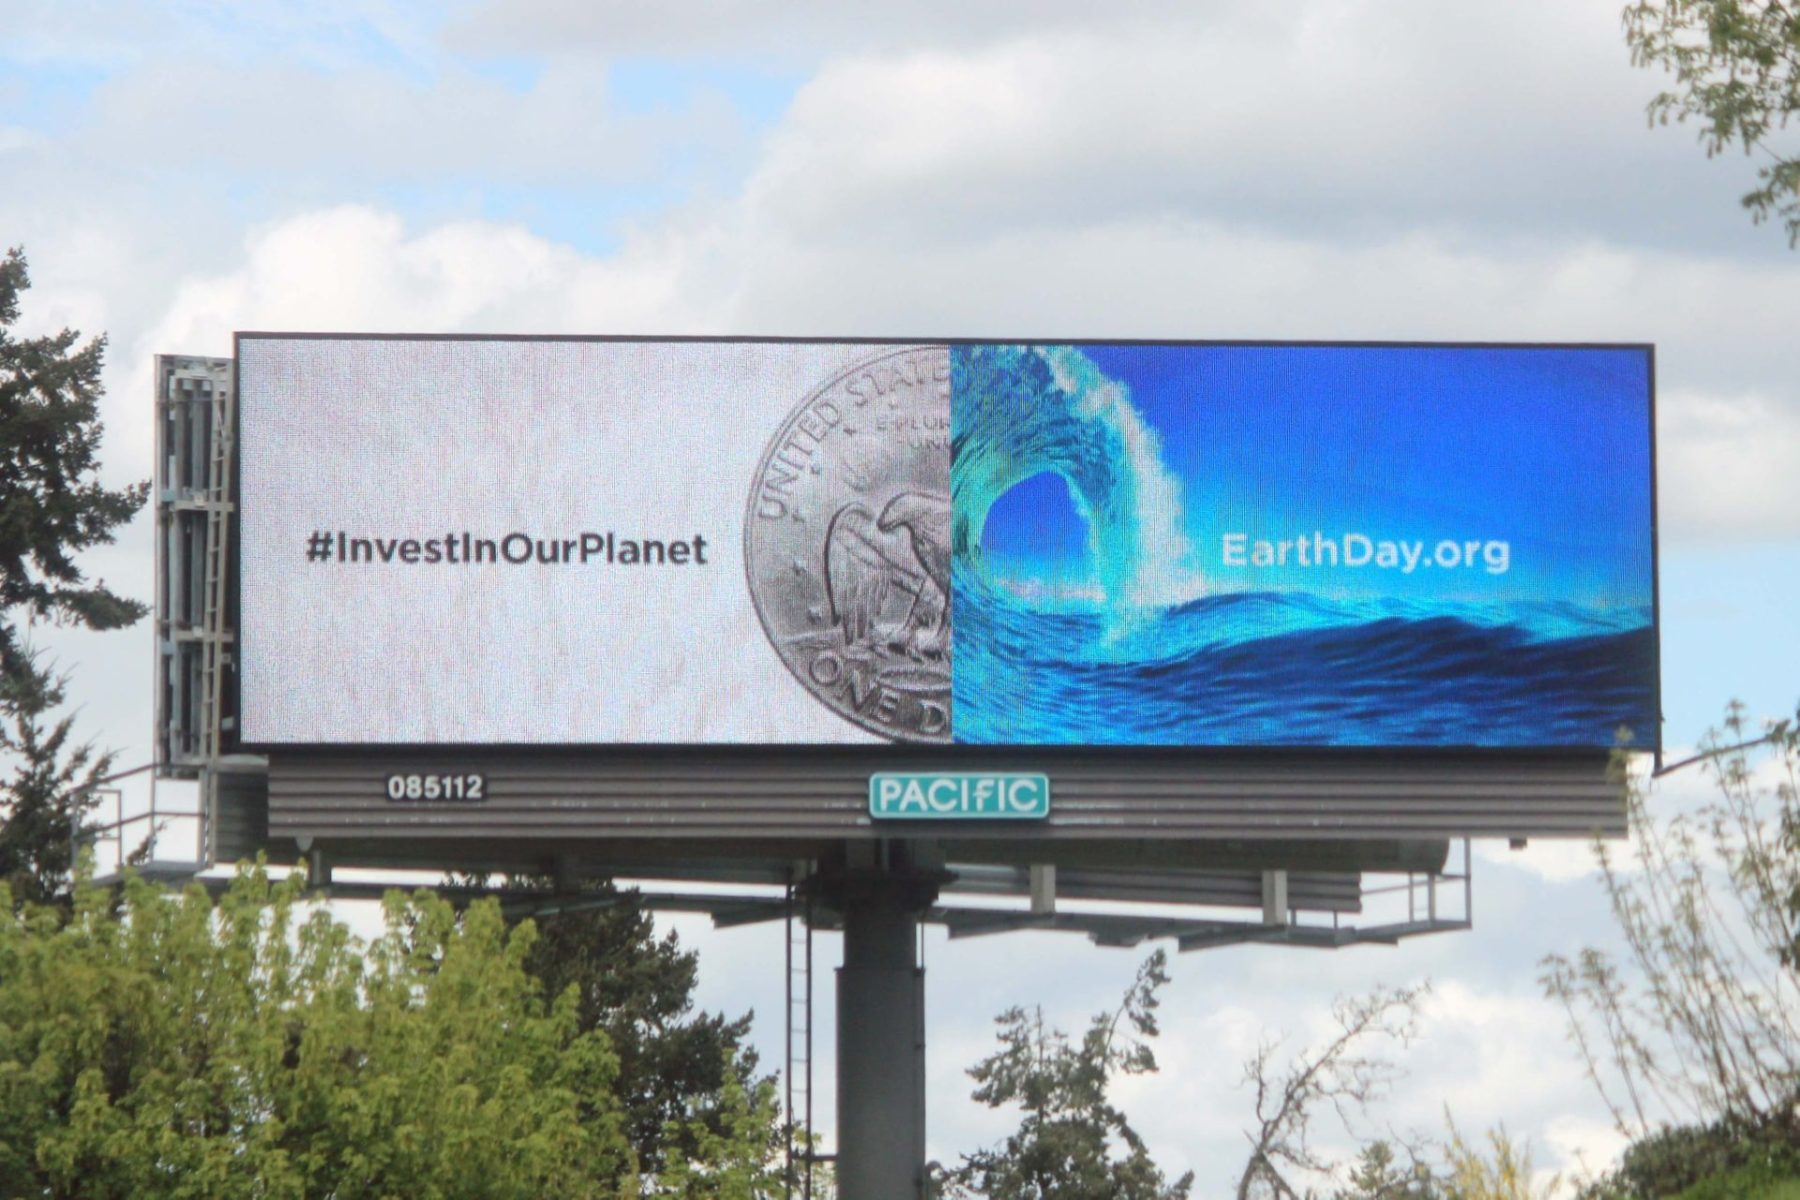 Out of Home Advertising digital billboard with #InvestInOurPlanet and image of a coin aligned with a wave of water.